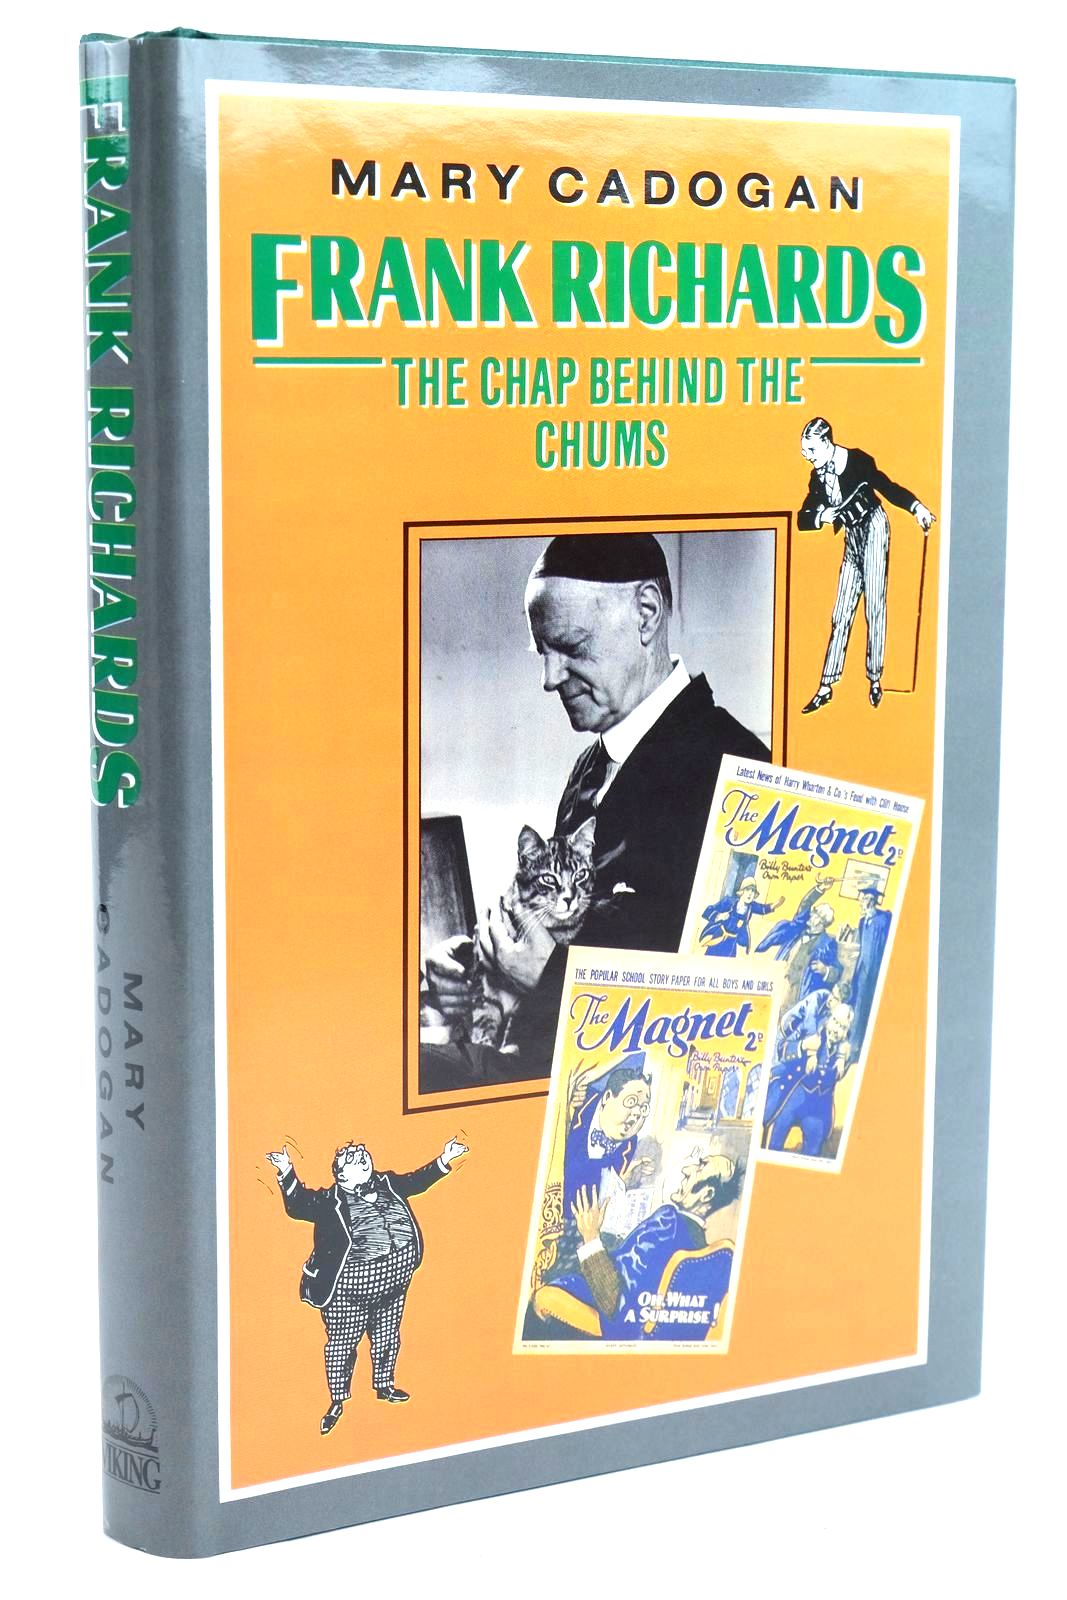 Photo of FRANK RICHARDS - THE CHAP BEHIND THE CHUMS written by Richards, Frank
Cadogan, Mary published by Viking (STOCK CODE: 1319703)  for sale by Stella & Rose's Books